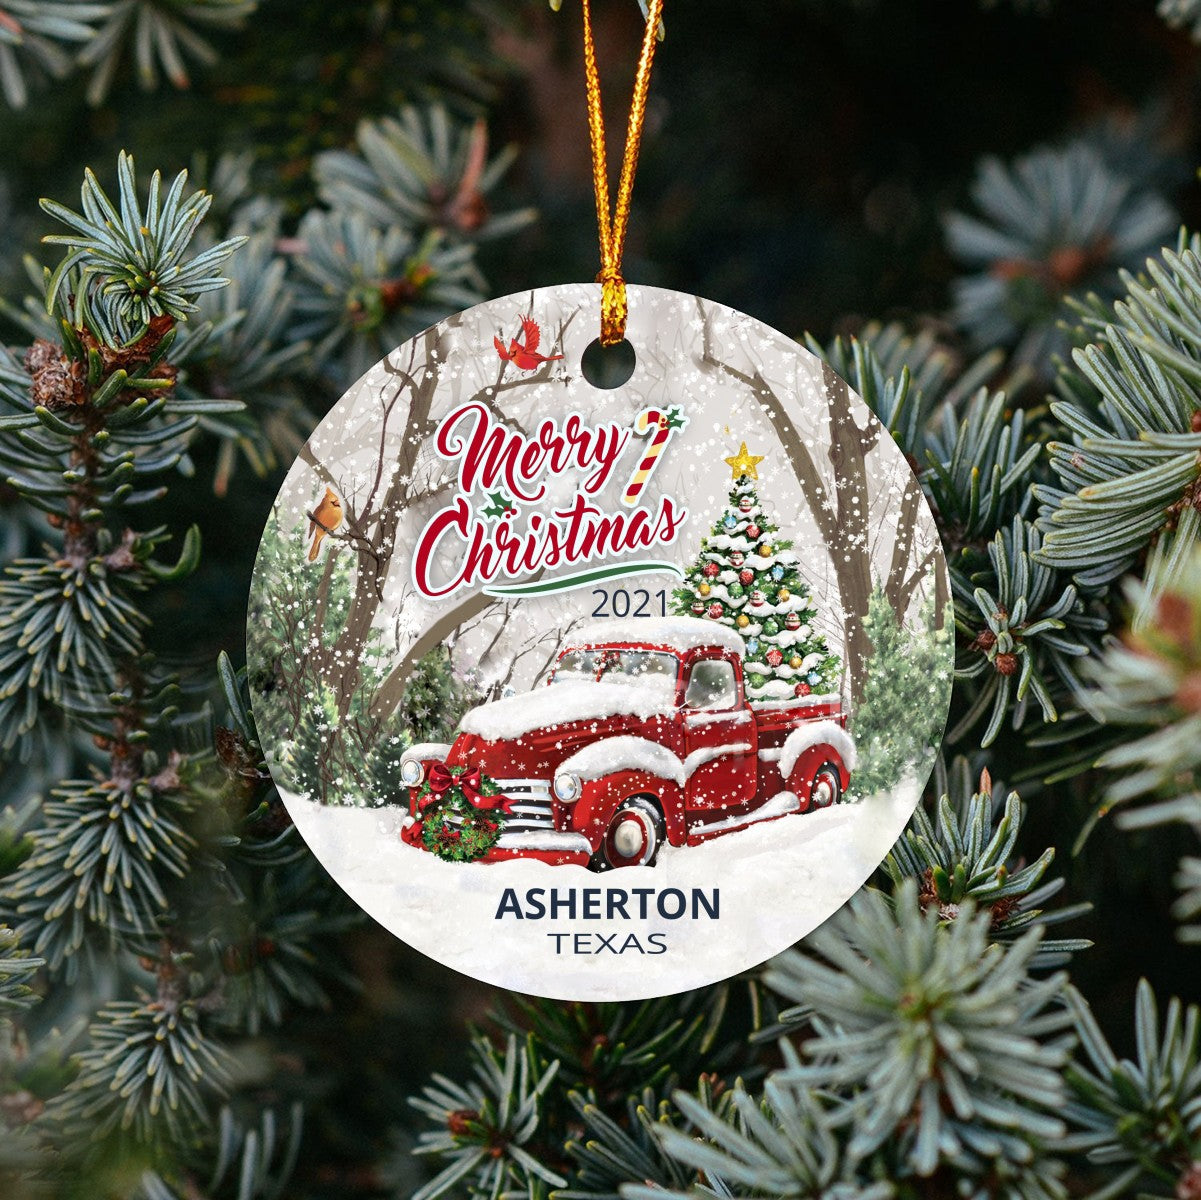 Christmas Tree Ornaments Asherton - Ornament With Name City, State Asherton Texas TX Ornament - Red Truck Xmas Ornaments 3'' Plastic Gift For Family, Friend And Housewarming